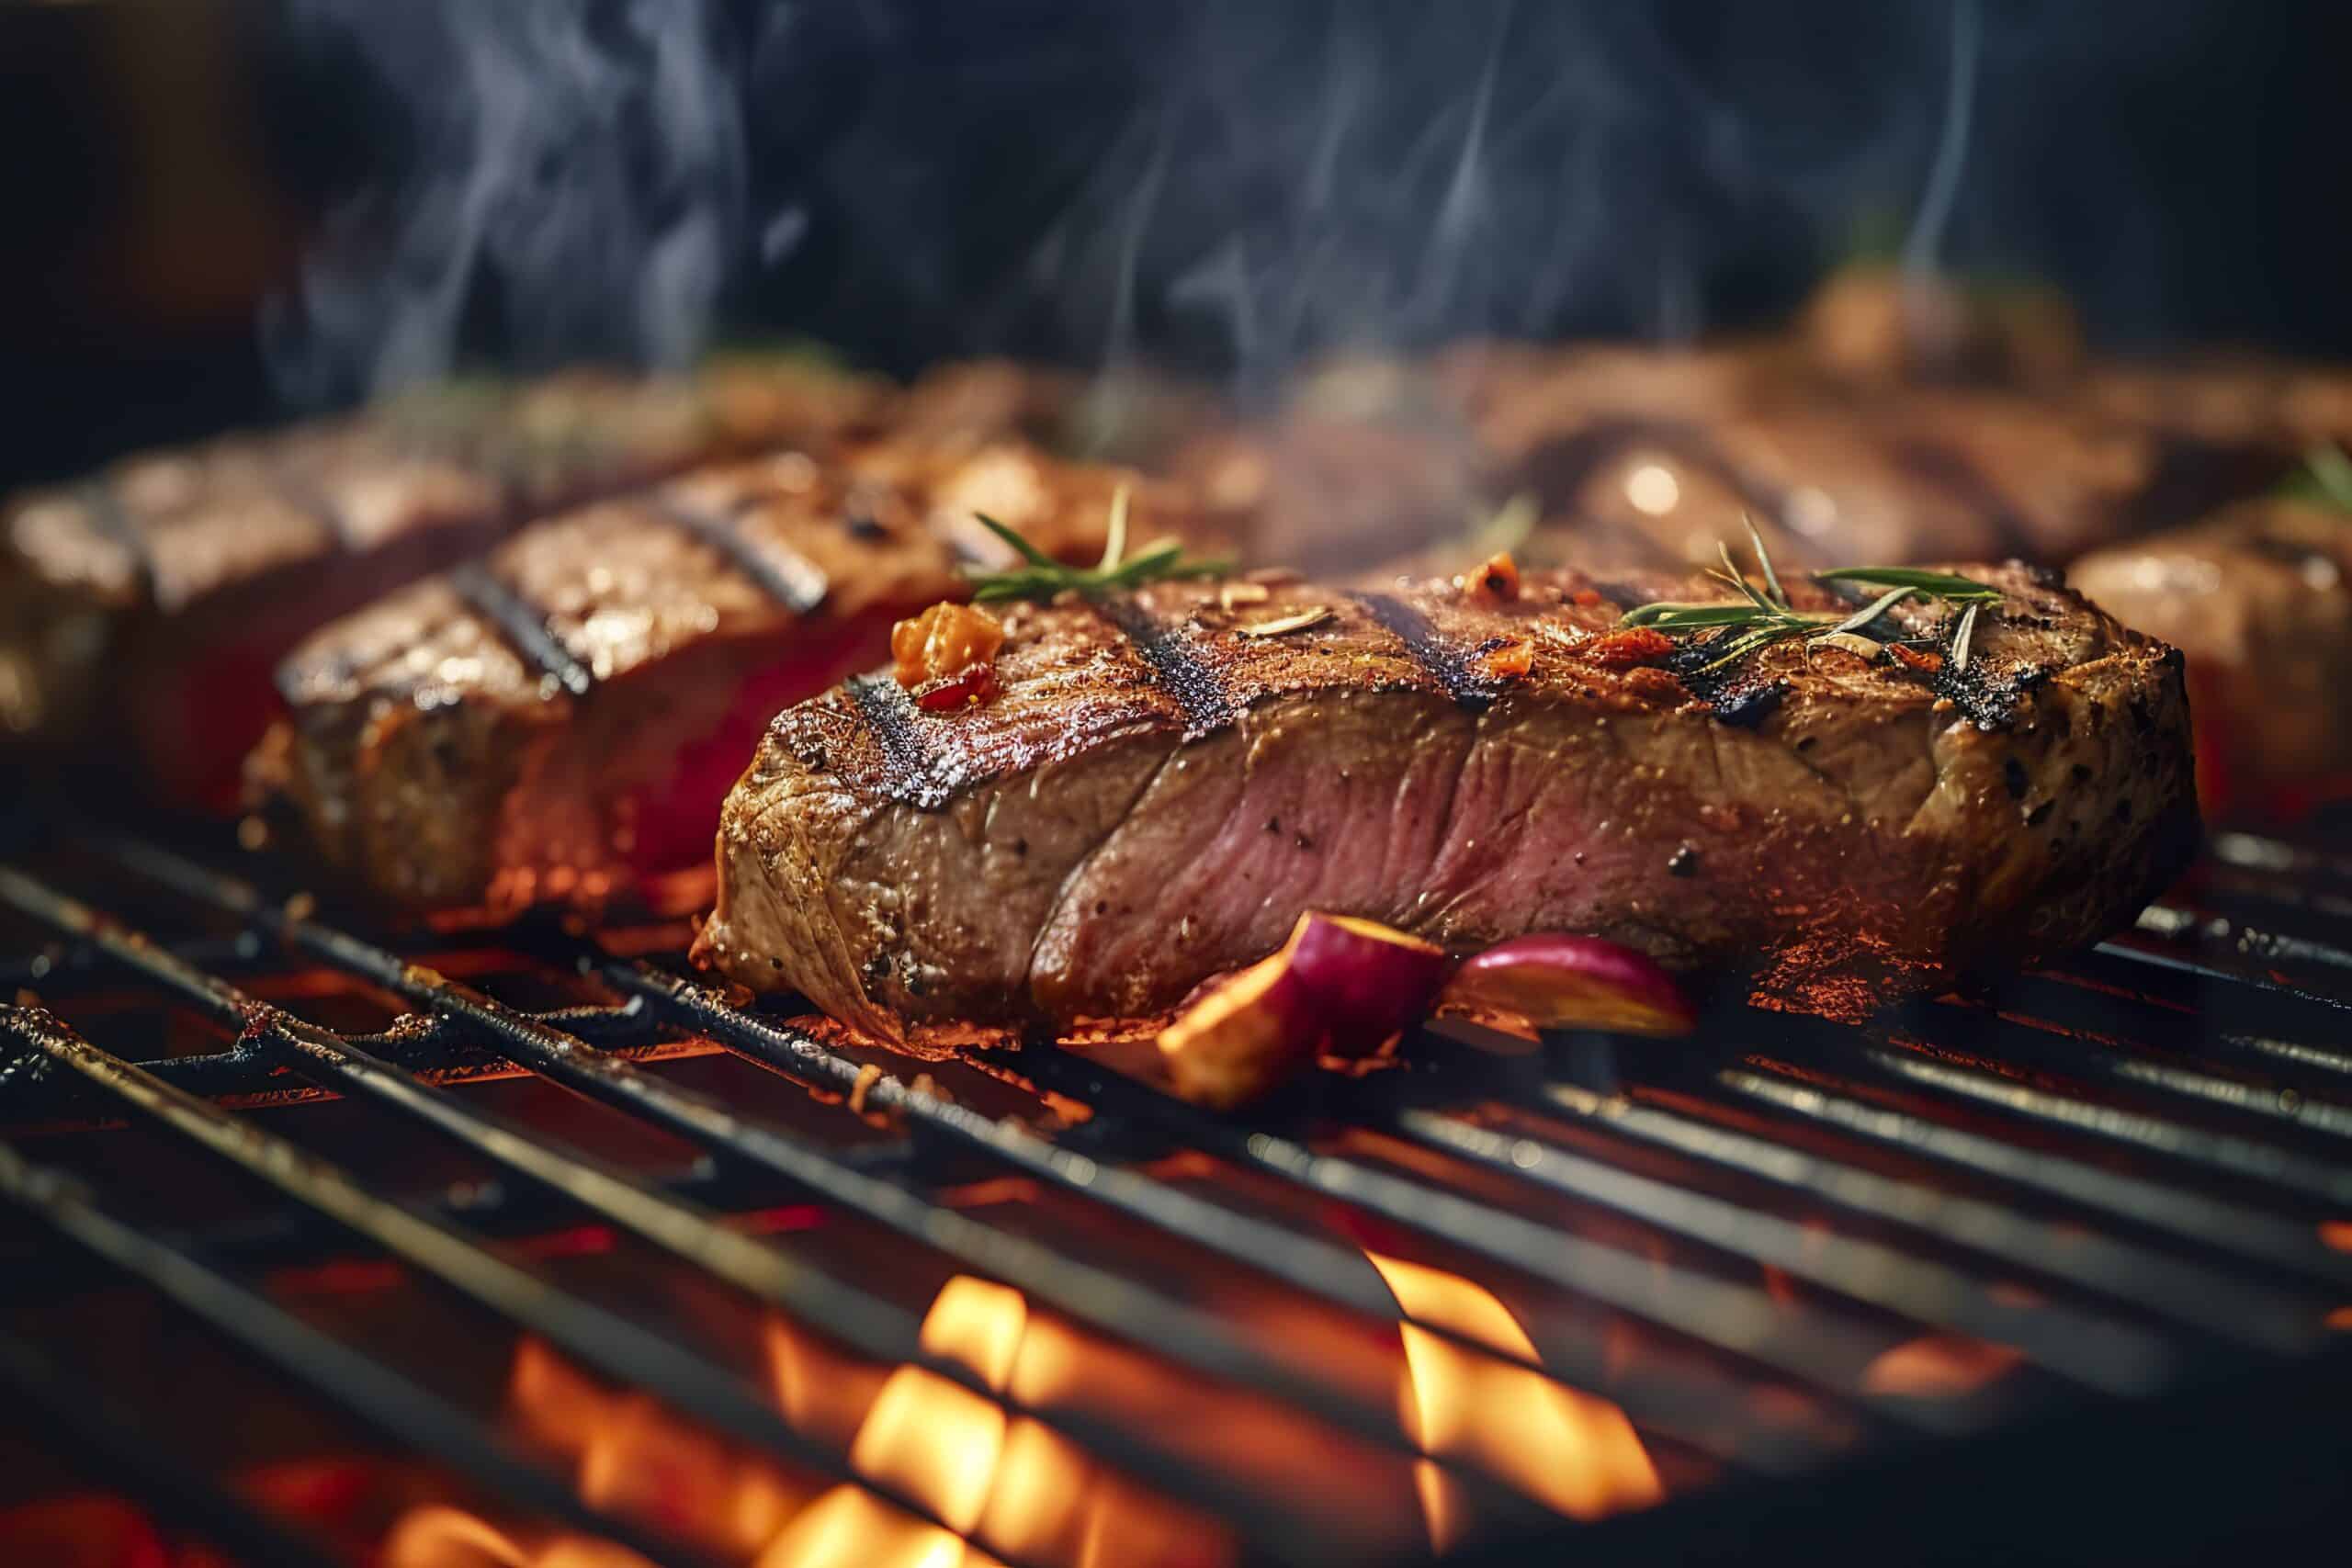 www.appr.com : How To Cook Tri Tip On Gas Grill?